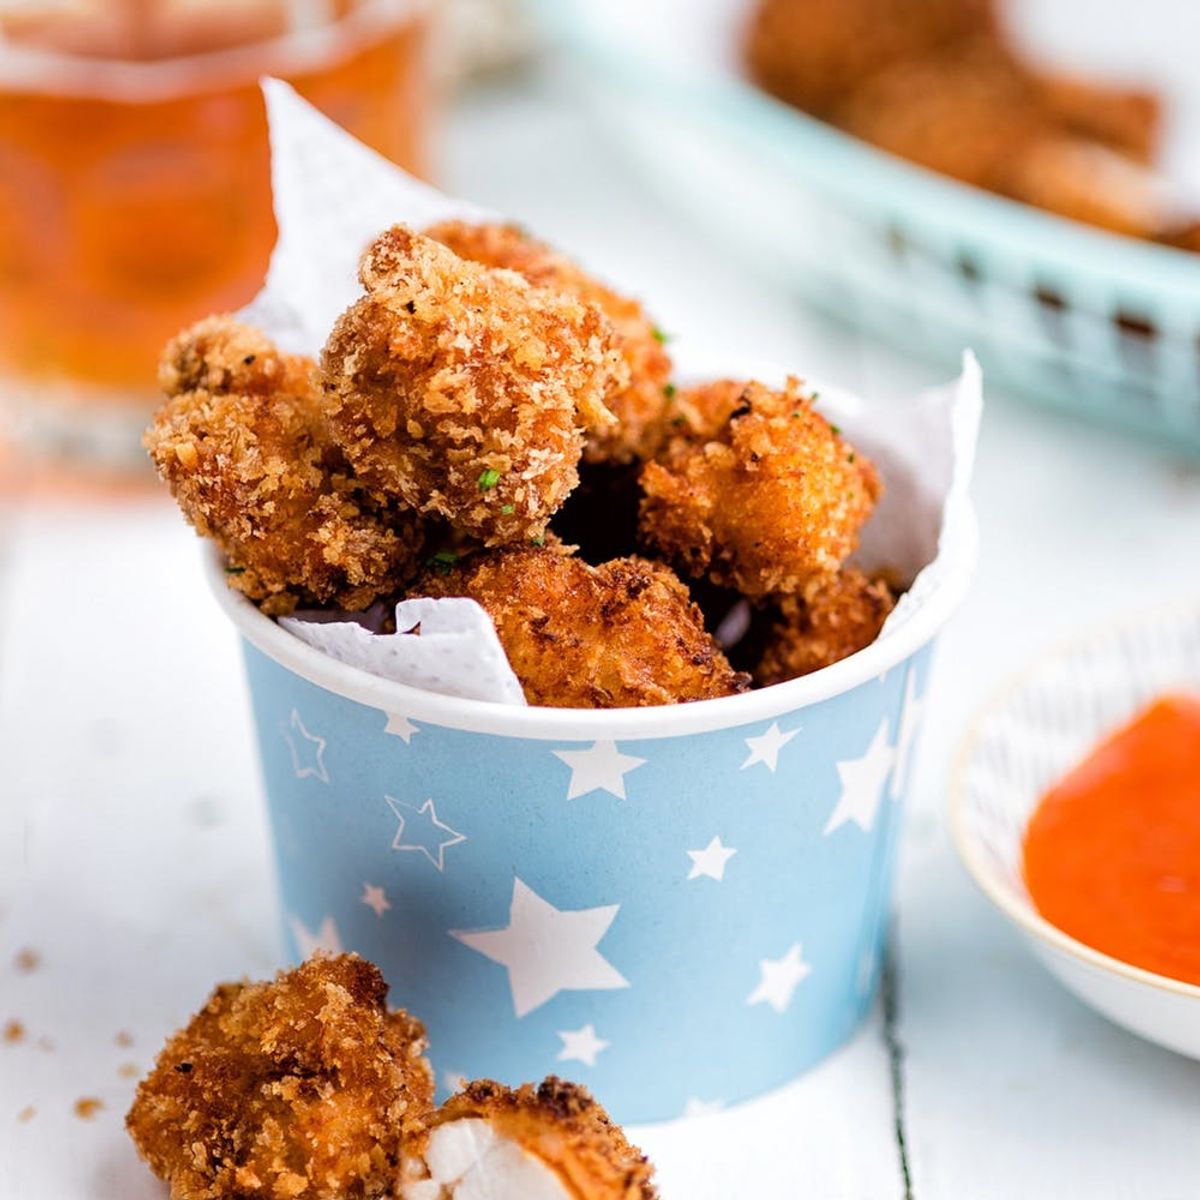 Look Away Now: This Popcorn Fried Chicken Is Super Addictive!